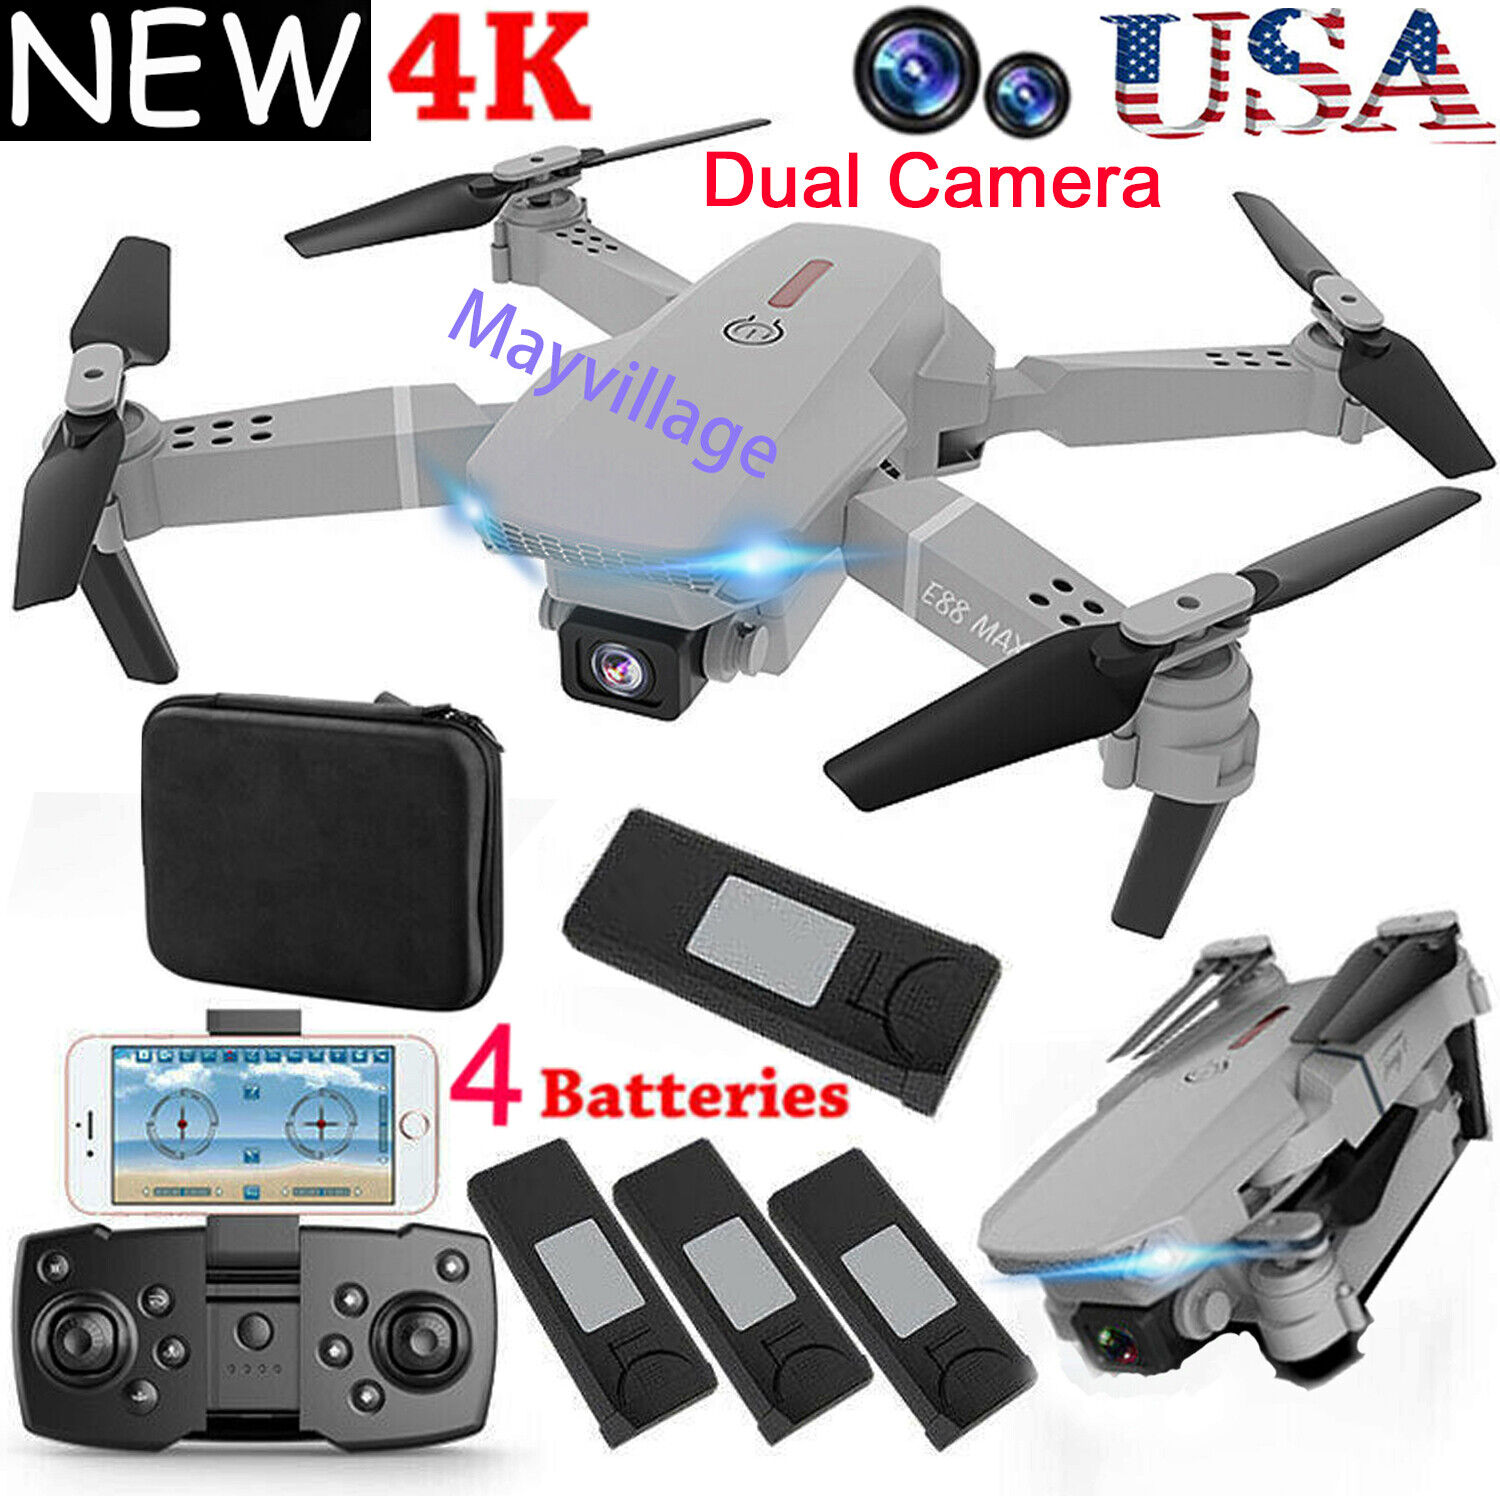 Foldable Dual Camera 4k HD Drone with 4 Batteries